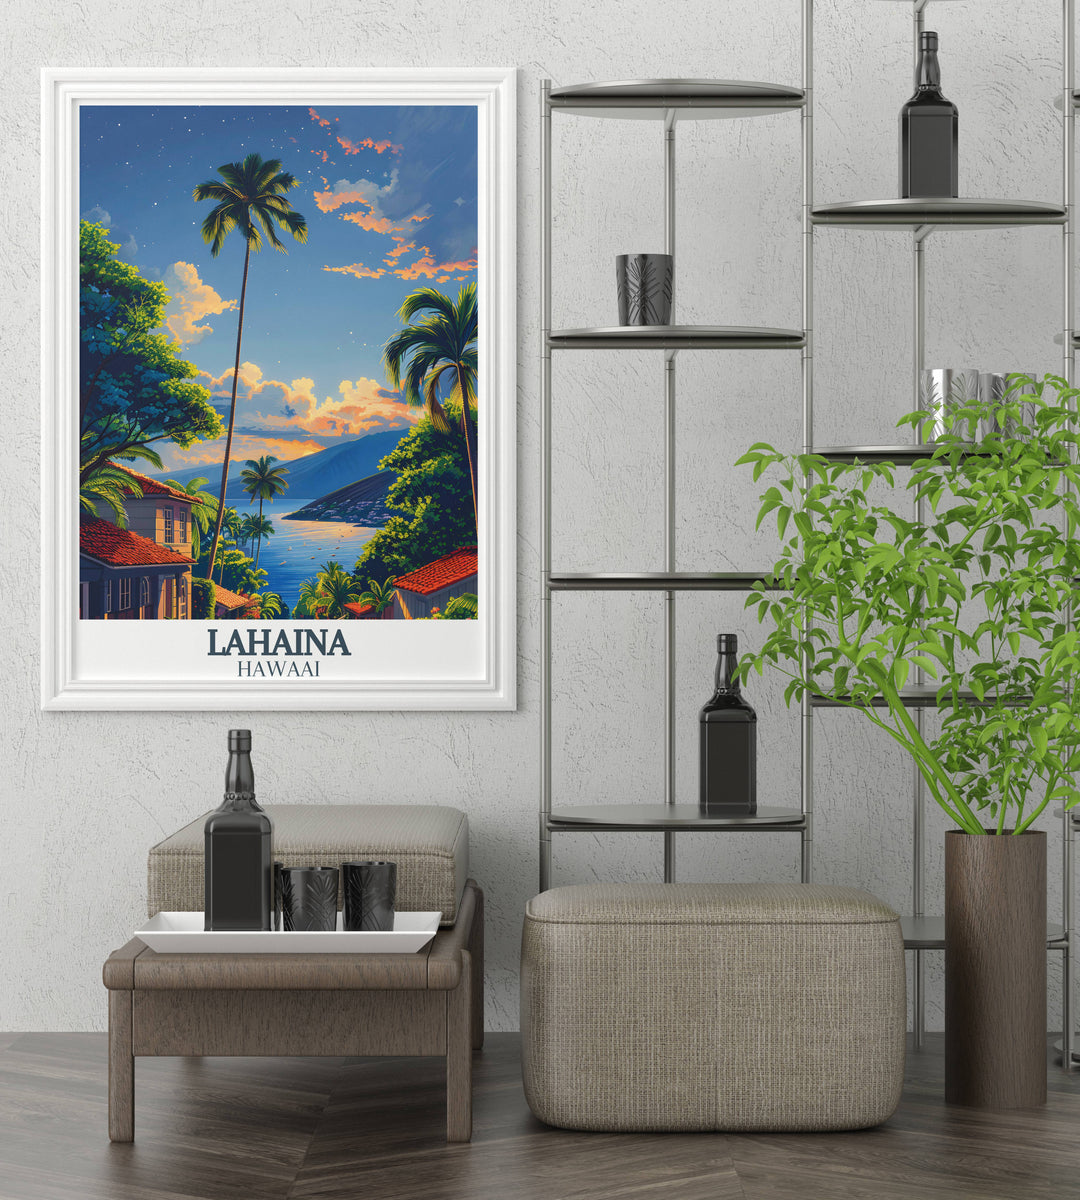 Canvas art featuring Front Street Lahaina under a golden sunset adding a warm tropical ambiance to any interior.